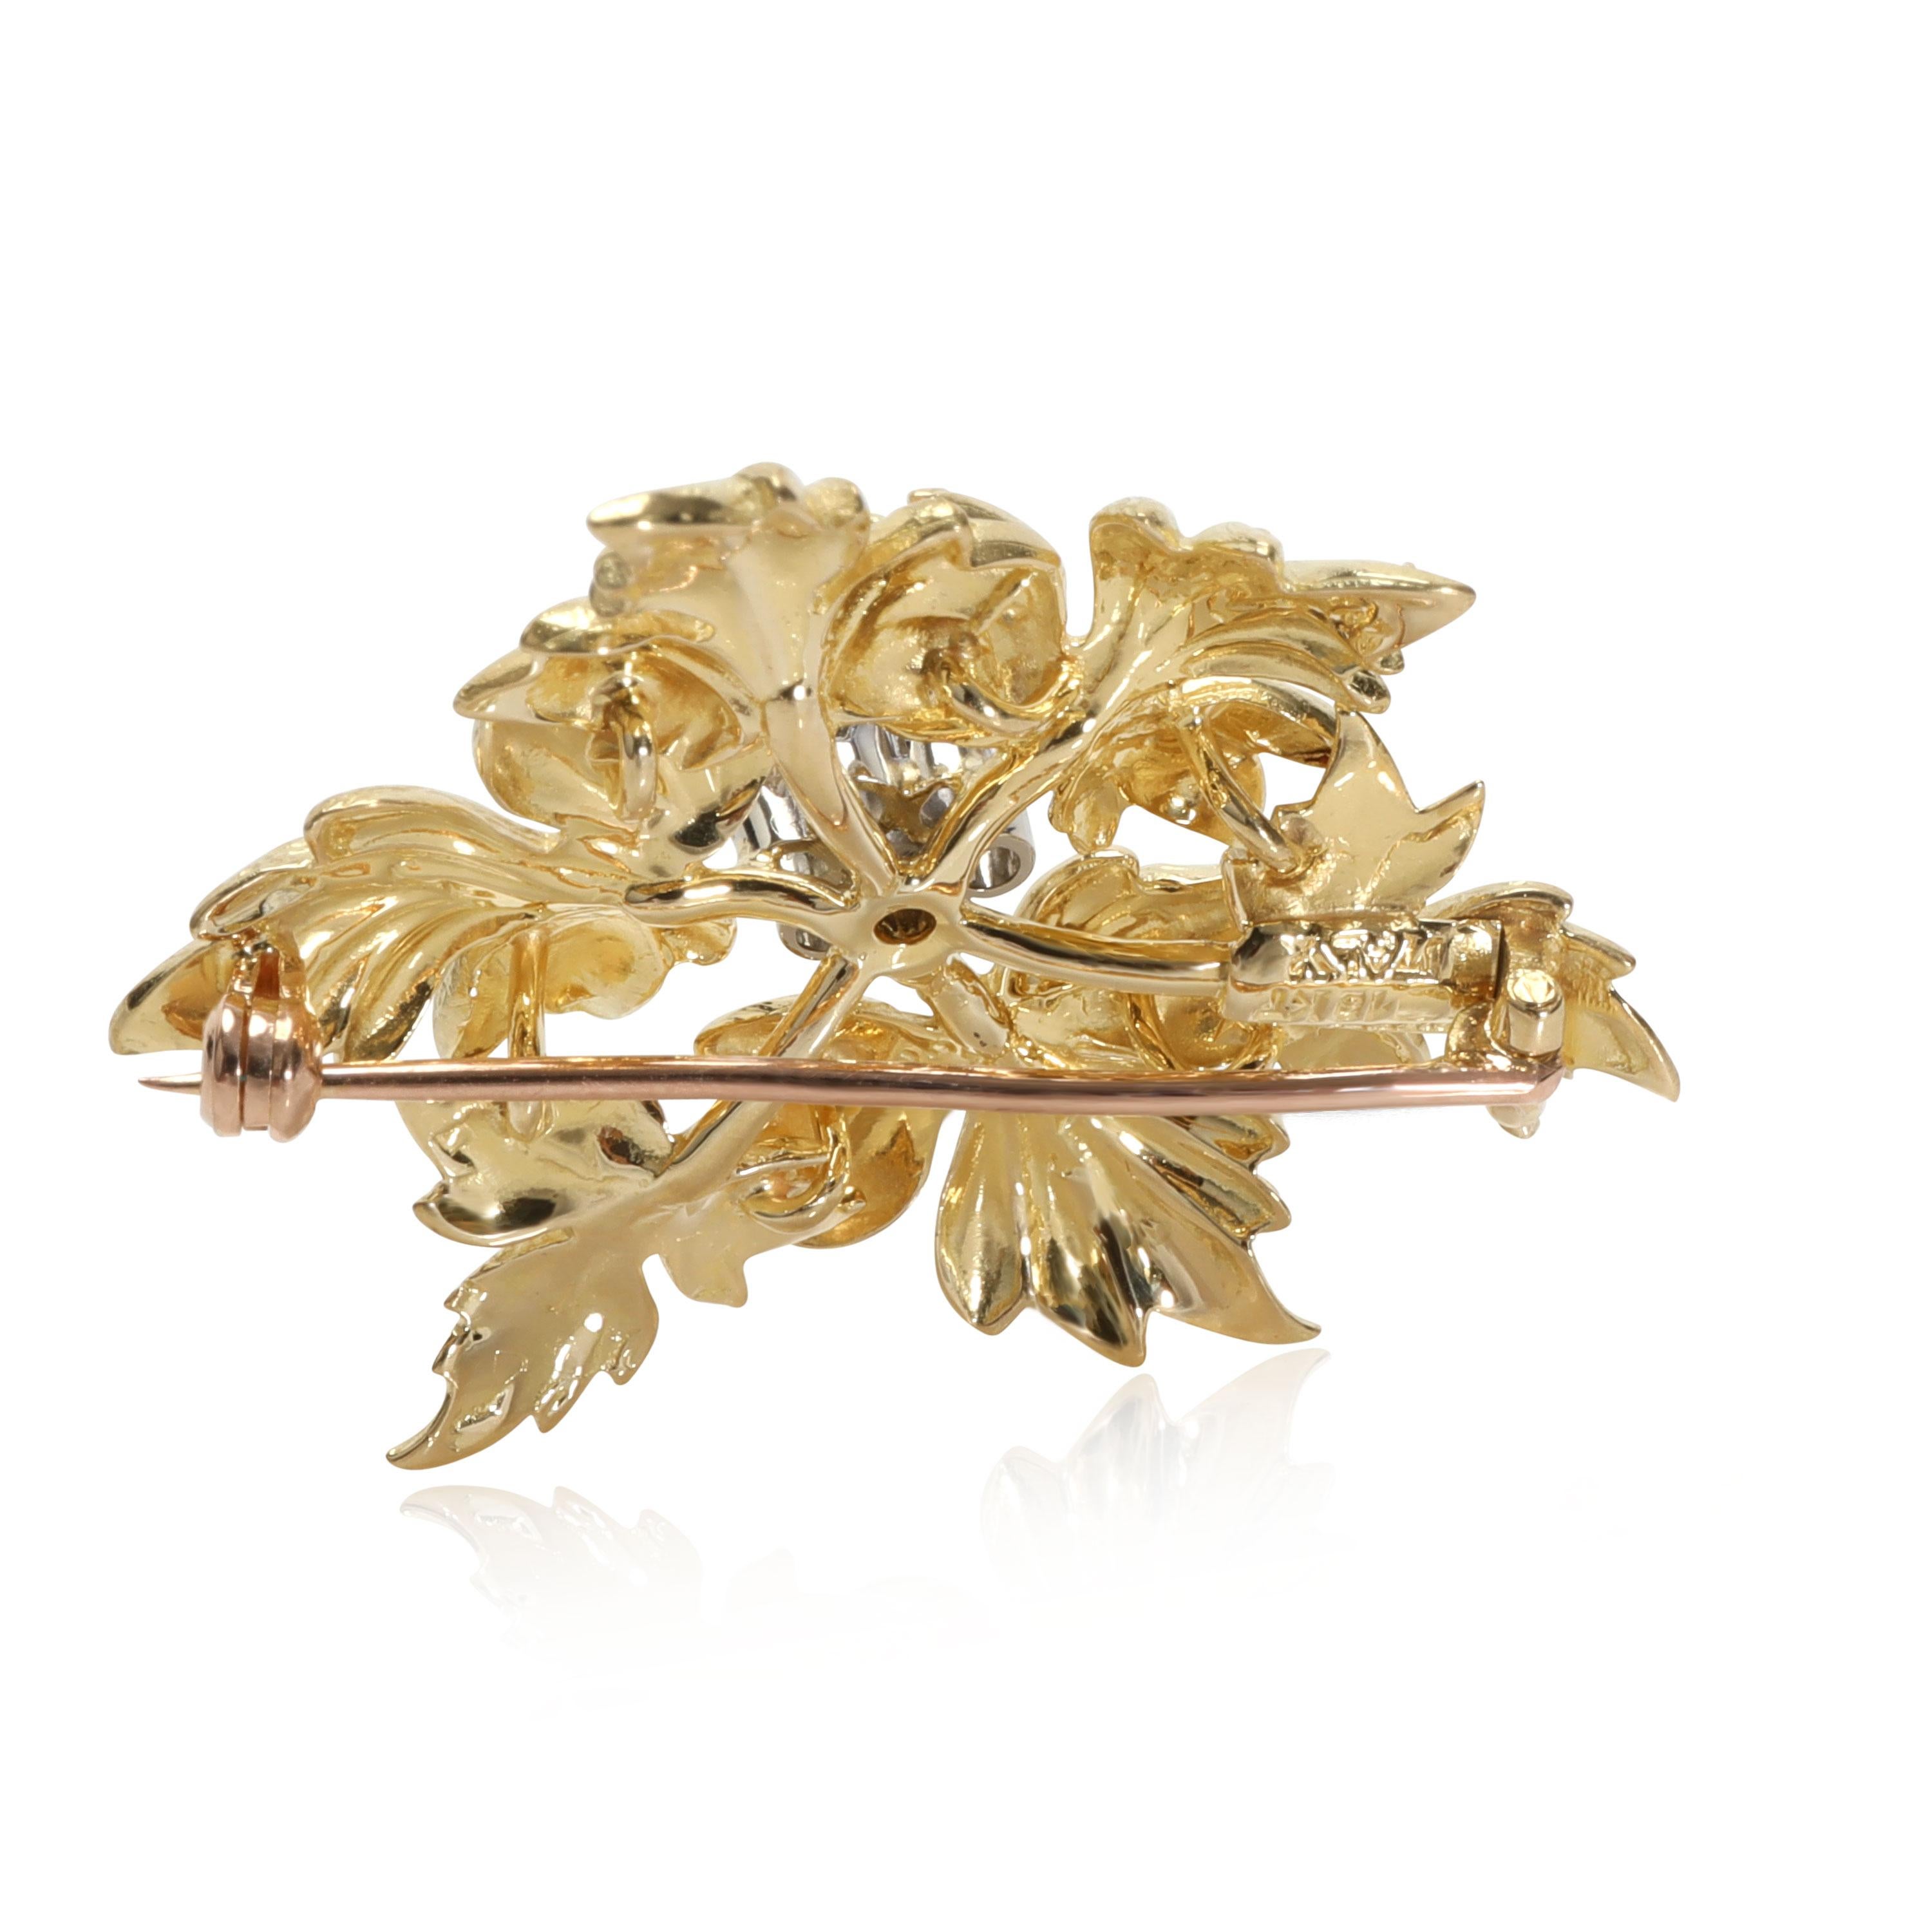 Tiffany & Co. Vintage Diamond Leaf Brooch in 18k Yellow Gold 0.15 CTW

PRIMARY DETAILS
SKU: 113141
Listing Title: Tiffany & Co. Vintage Diamond Leaf Brooch in 18k Yellow Gold 0.15 CTW
Condition Description: Retails for 3,500 USD. Length is 1 3/8